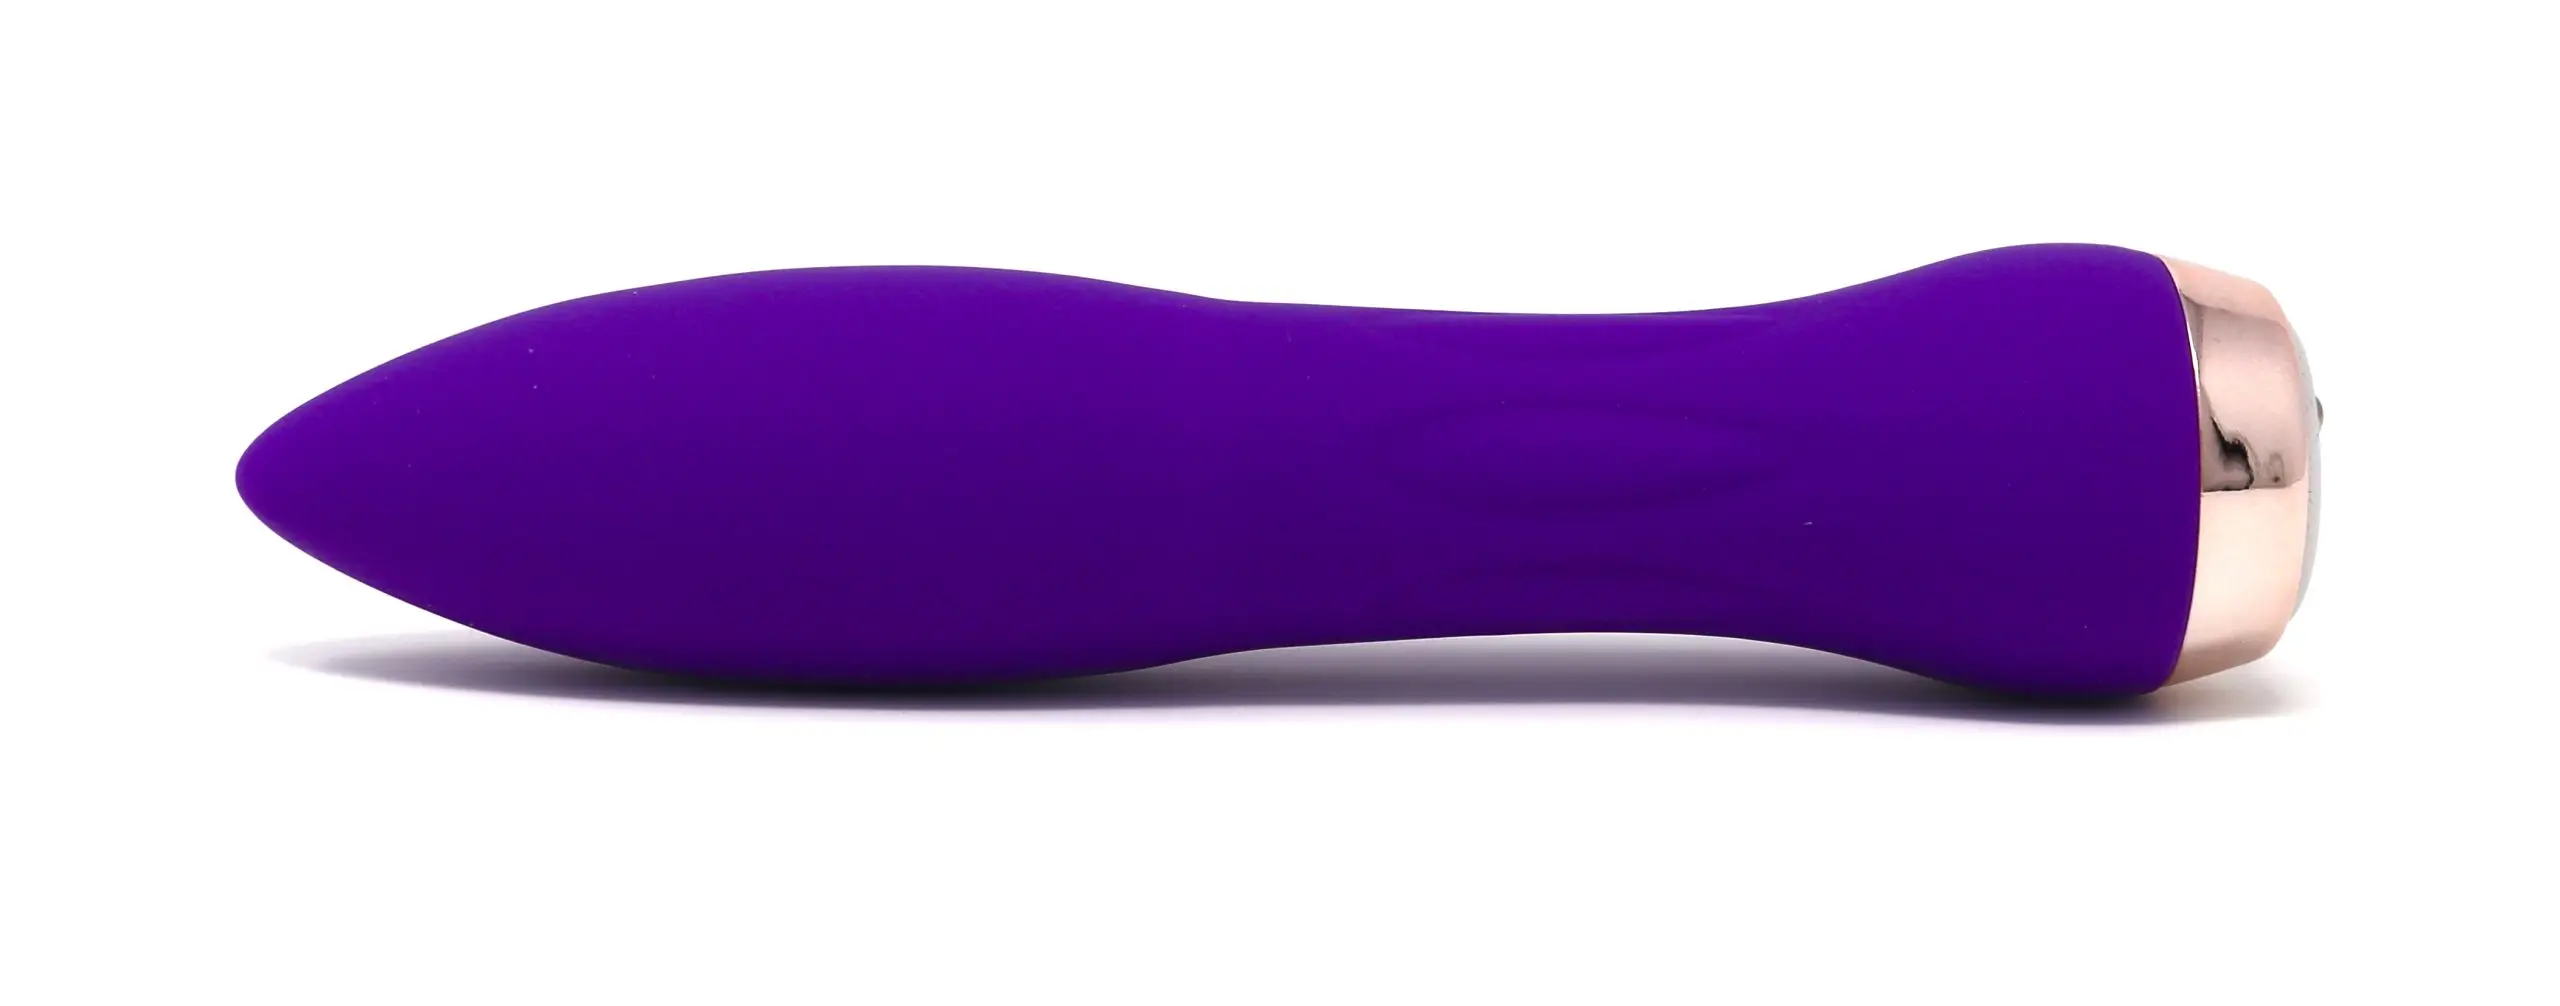 Jack and Jill Adult's Jackie Love bullet vibrator in purple